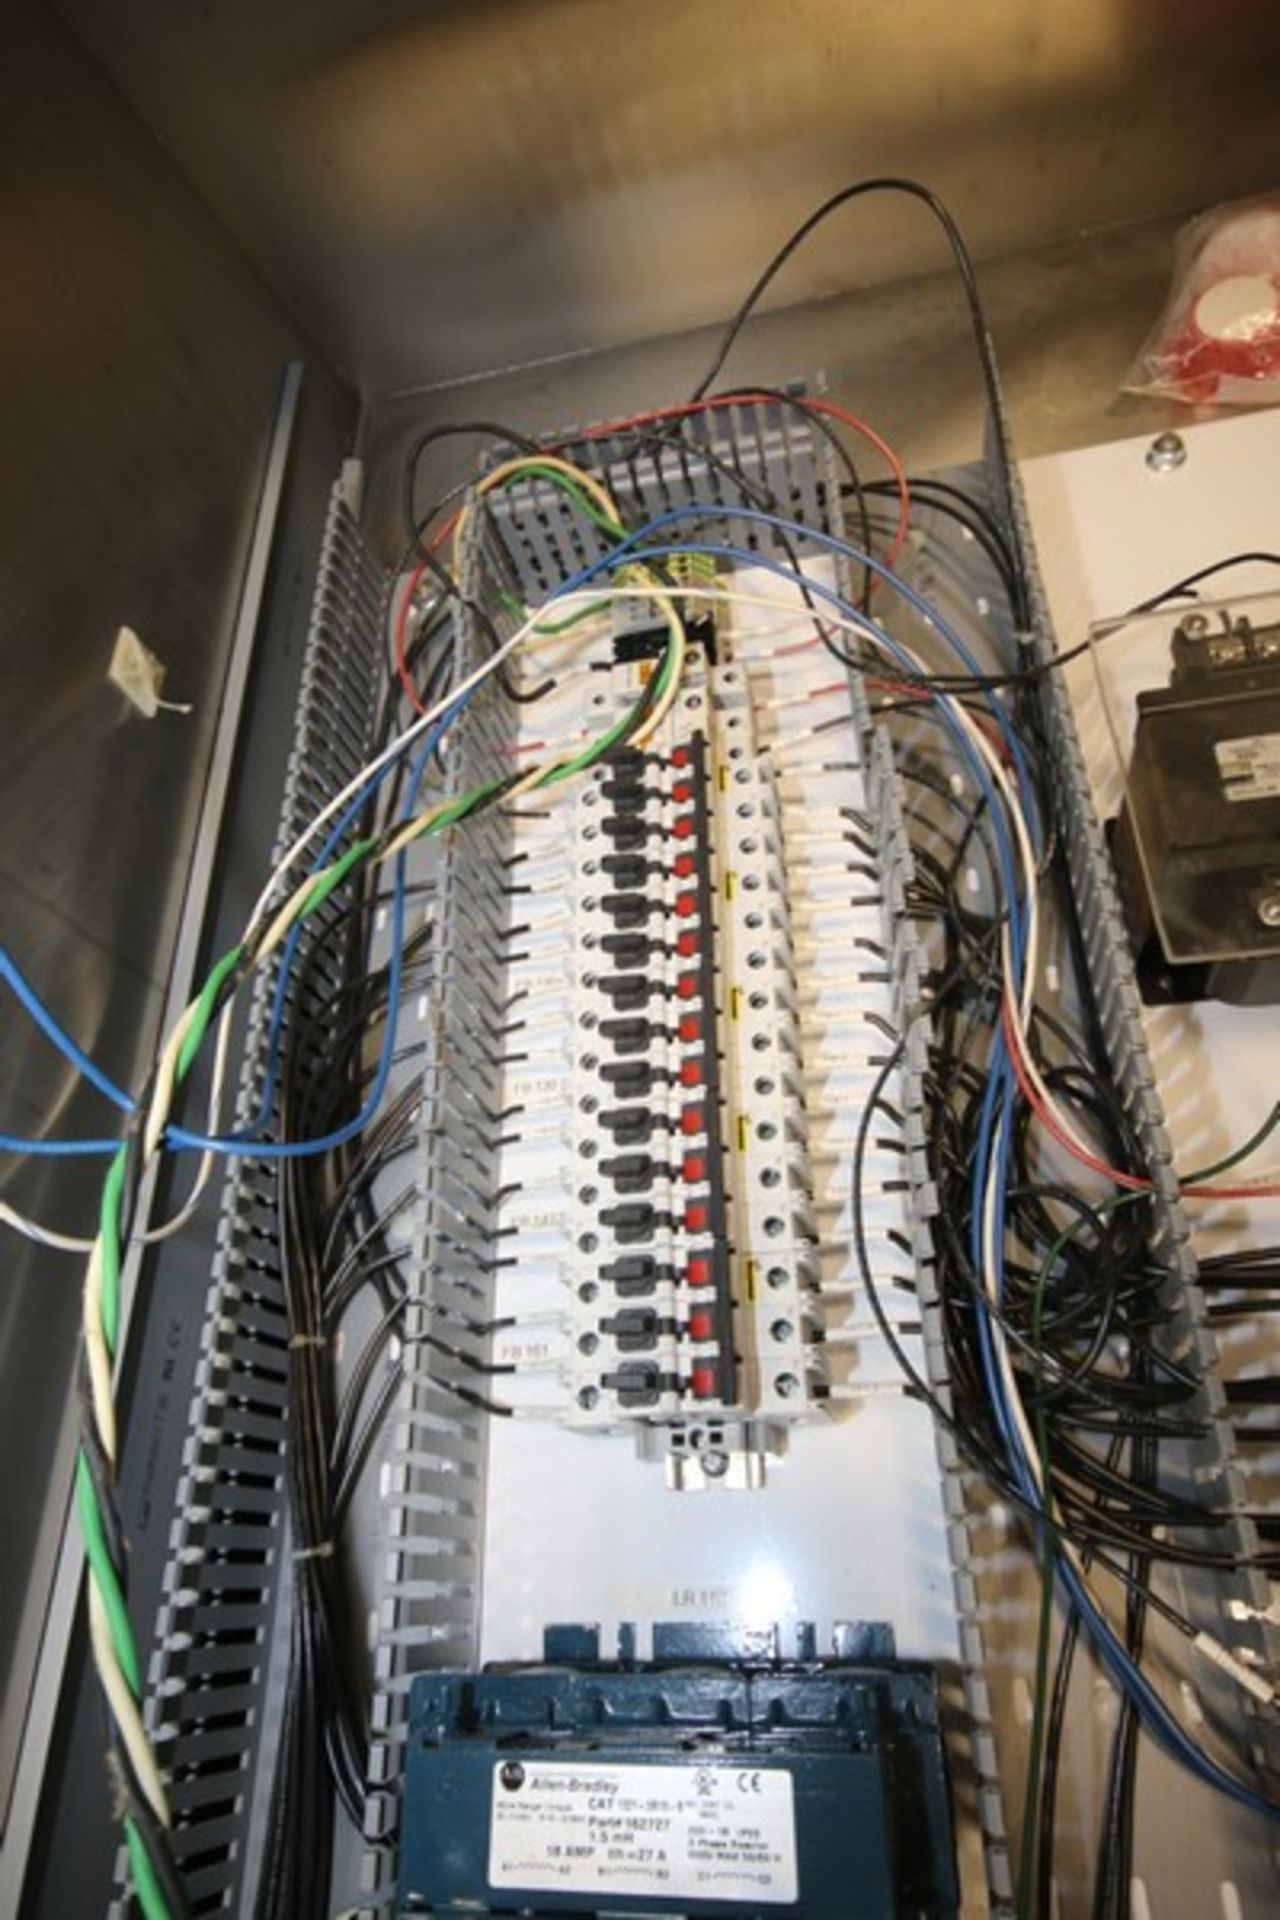 Hoffman 55" L x 38" W x 16" D S/S Control Panel (Hot Water Skid Controls), 480V with Allen Bradley - Image 6 of 6